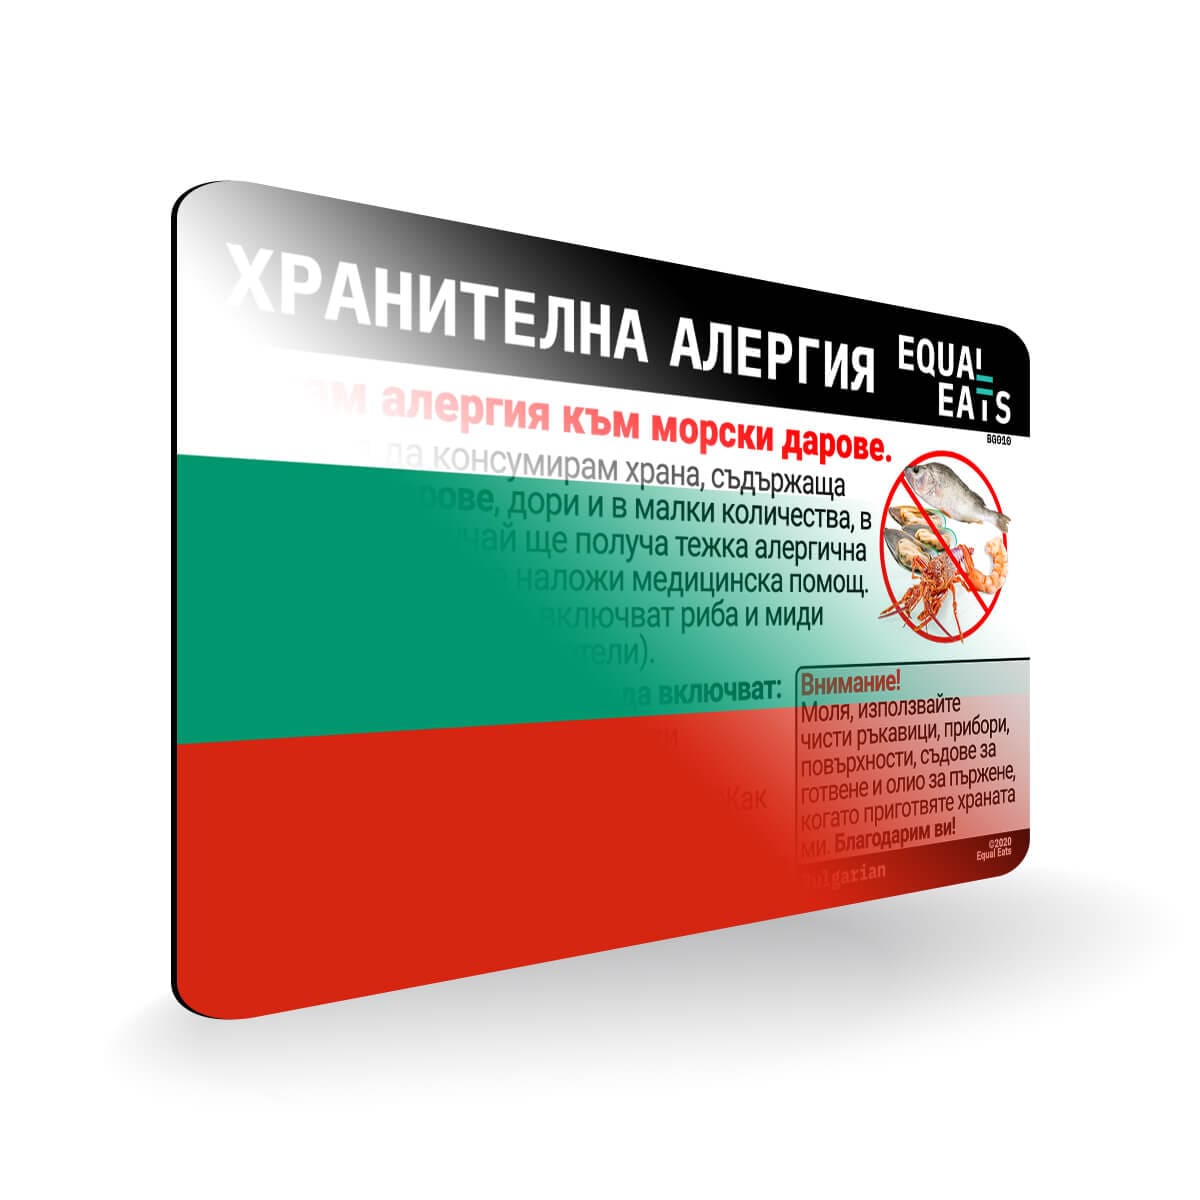 Seafood Allergy in Bulgarian. Seafood Allergy Card for Bulgaria